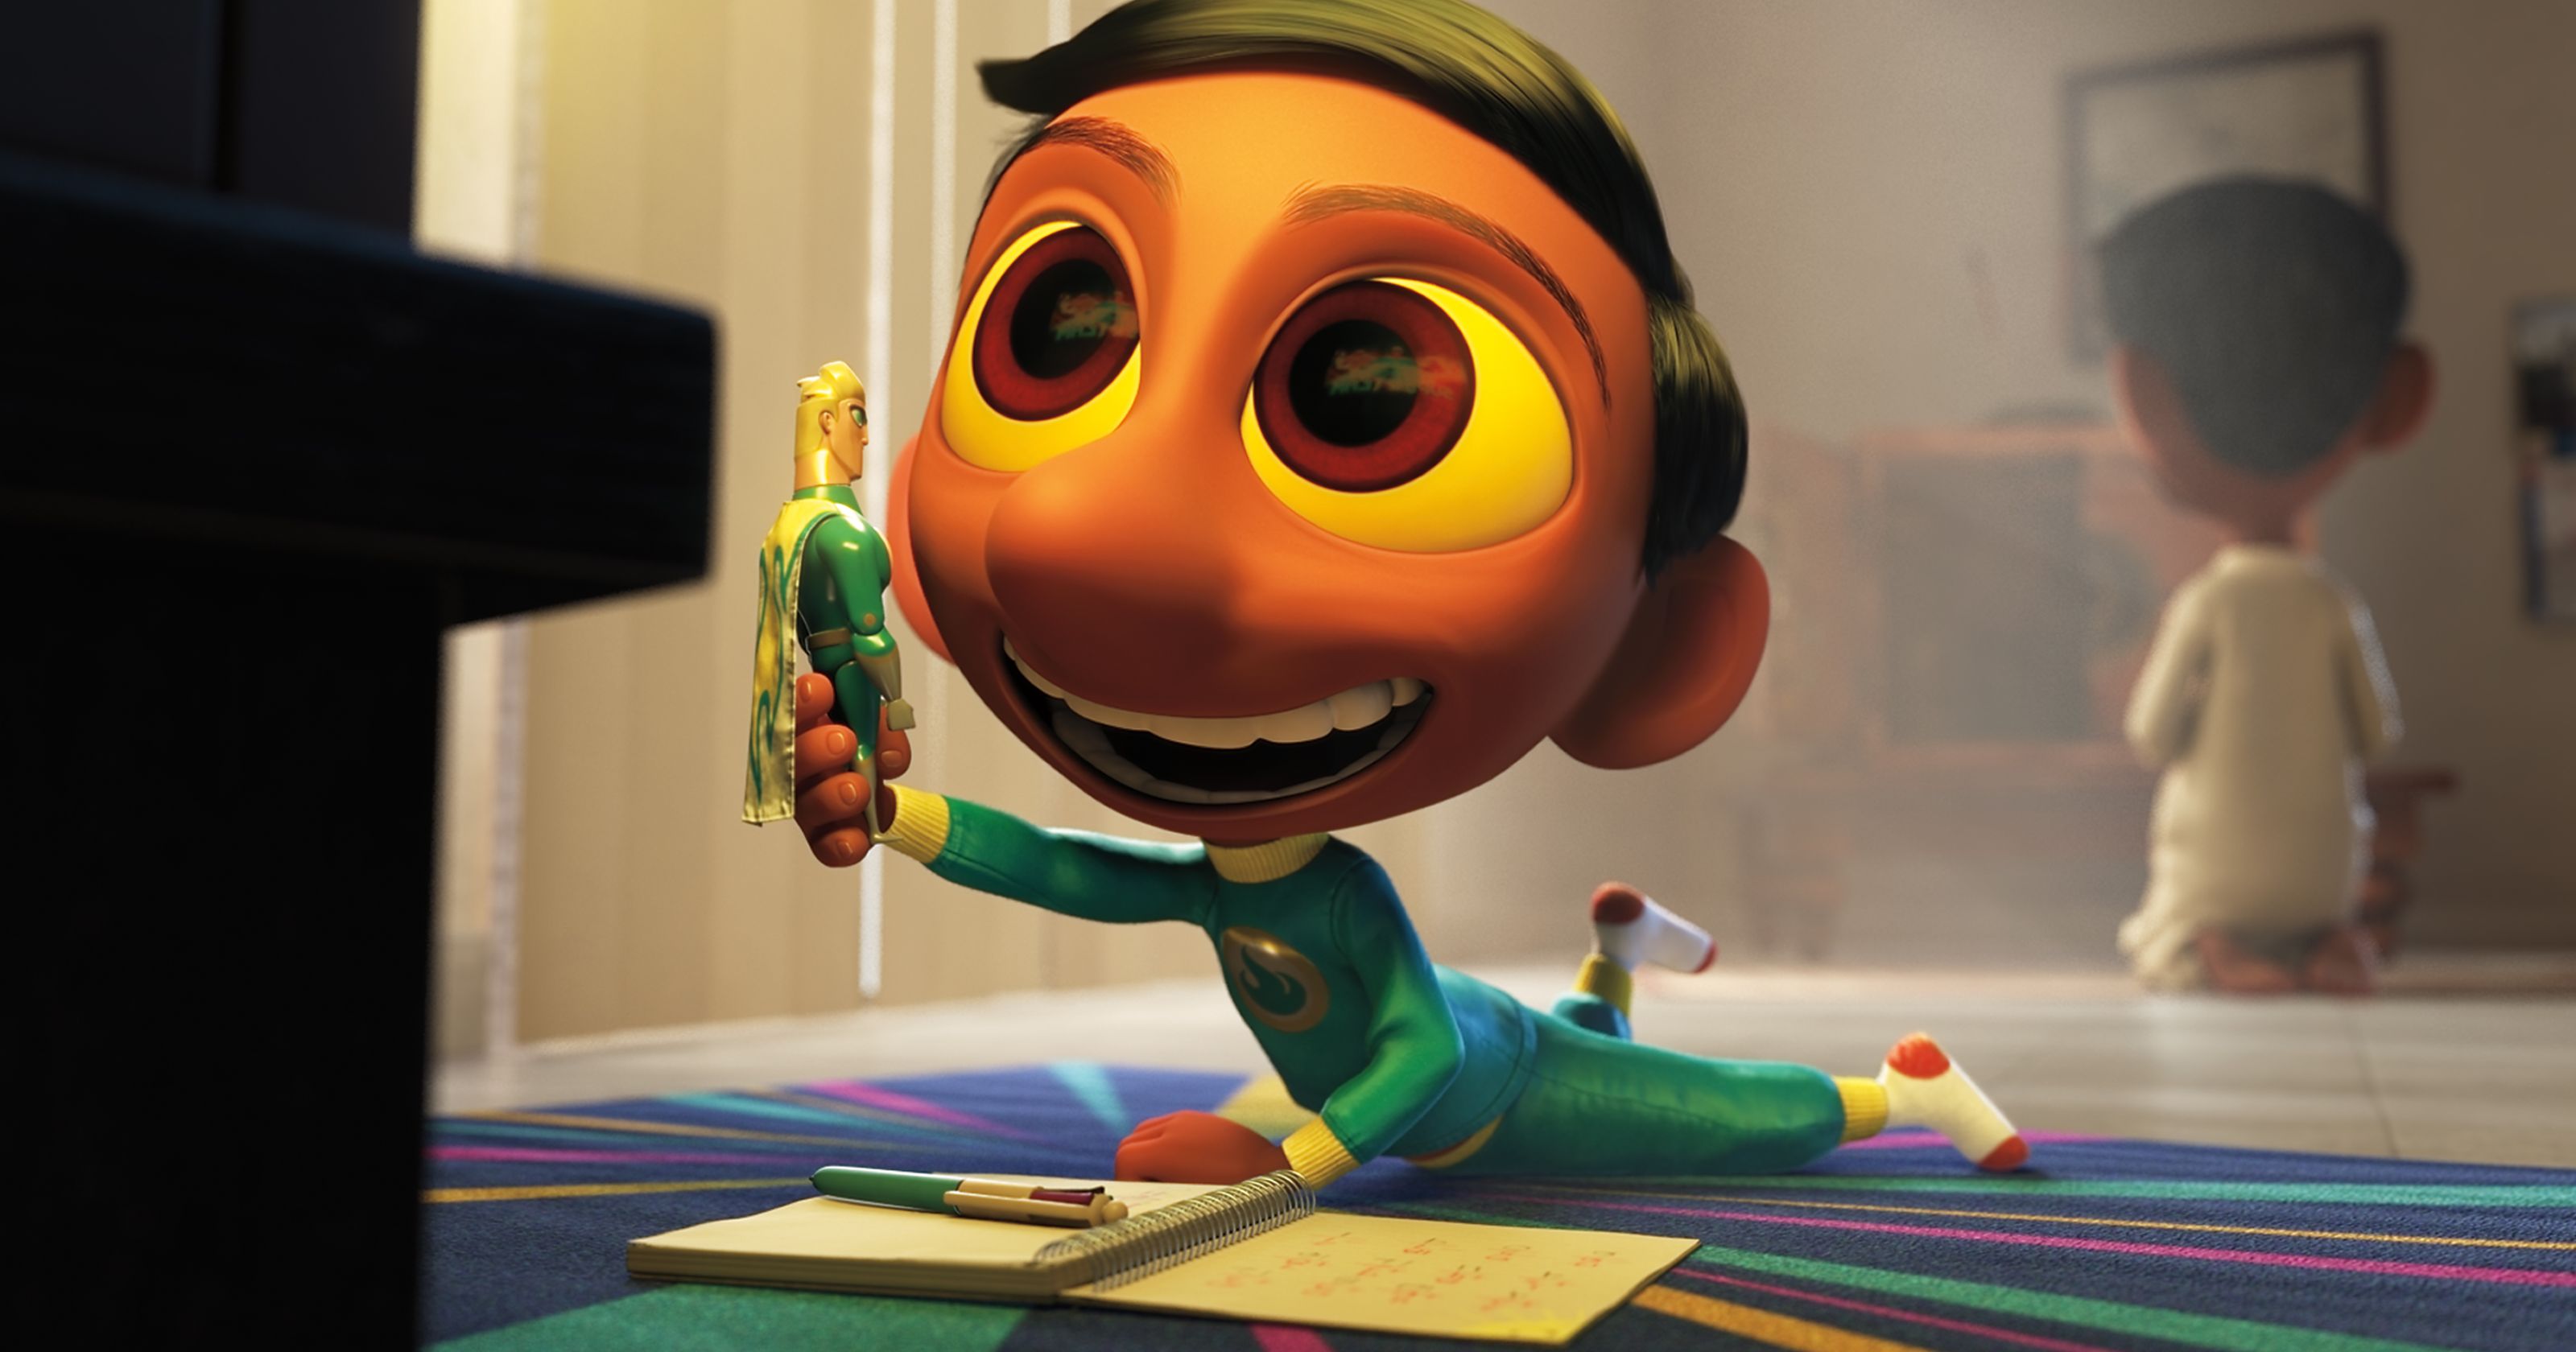 OSCARS 2016 - Short Movie nominated SANJAY'S SUPER TEAM Pixar picture 1 - Go with the Blog